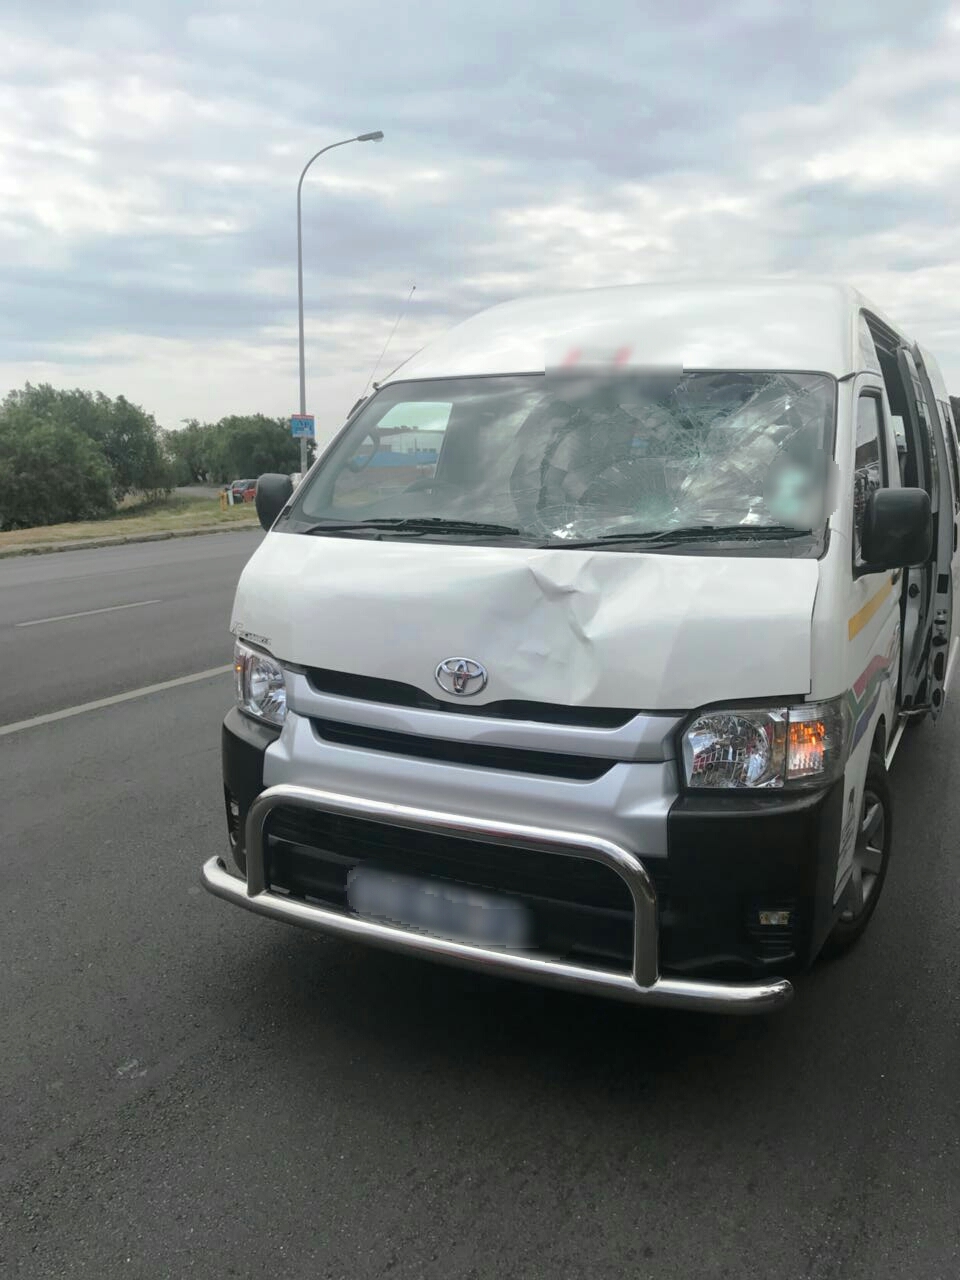 Female pedestrian hospitalised after being knocked down by a minibus taxi near to Home Affairs in Roodepoort